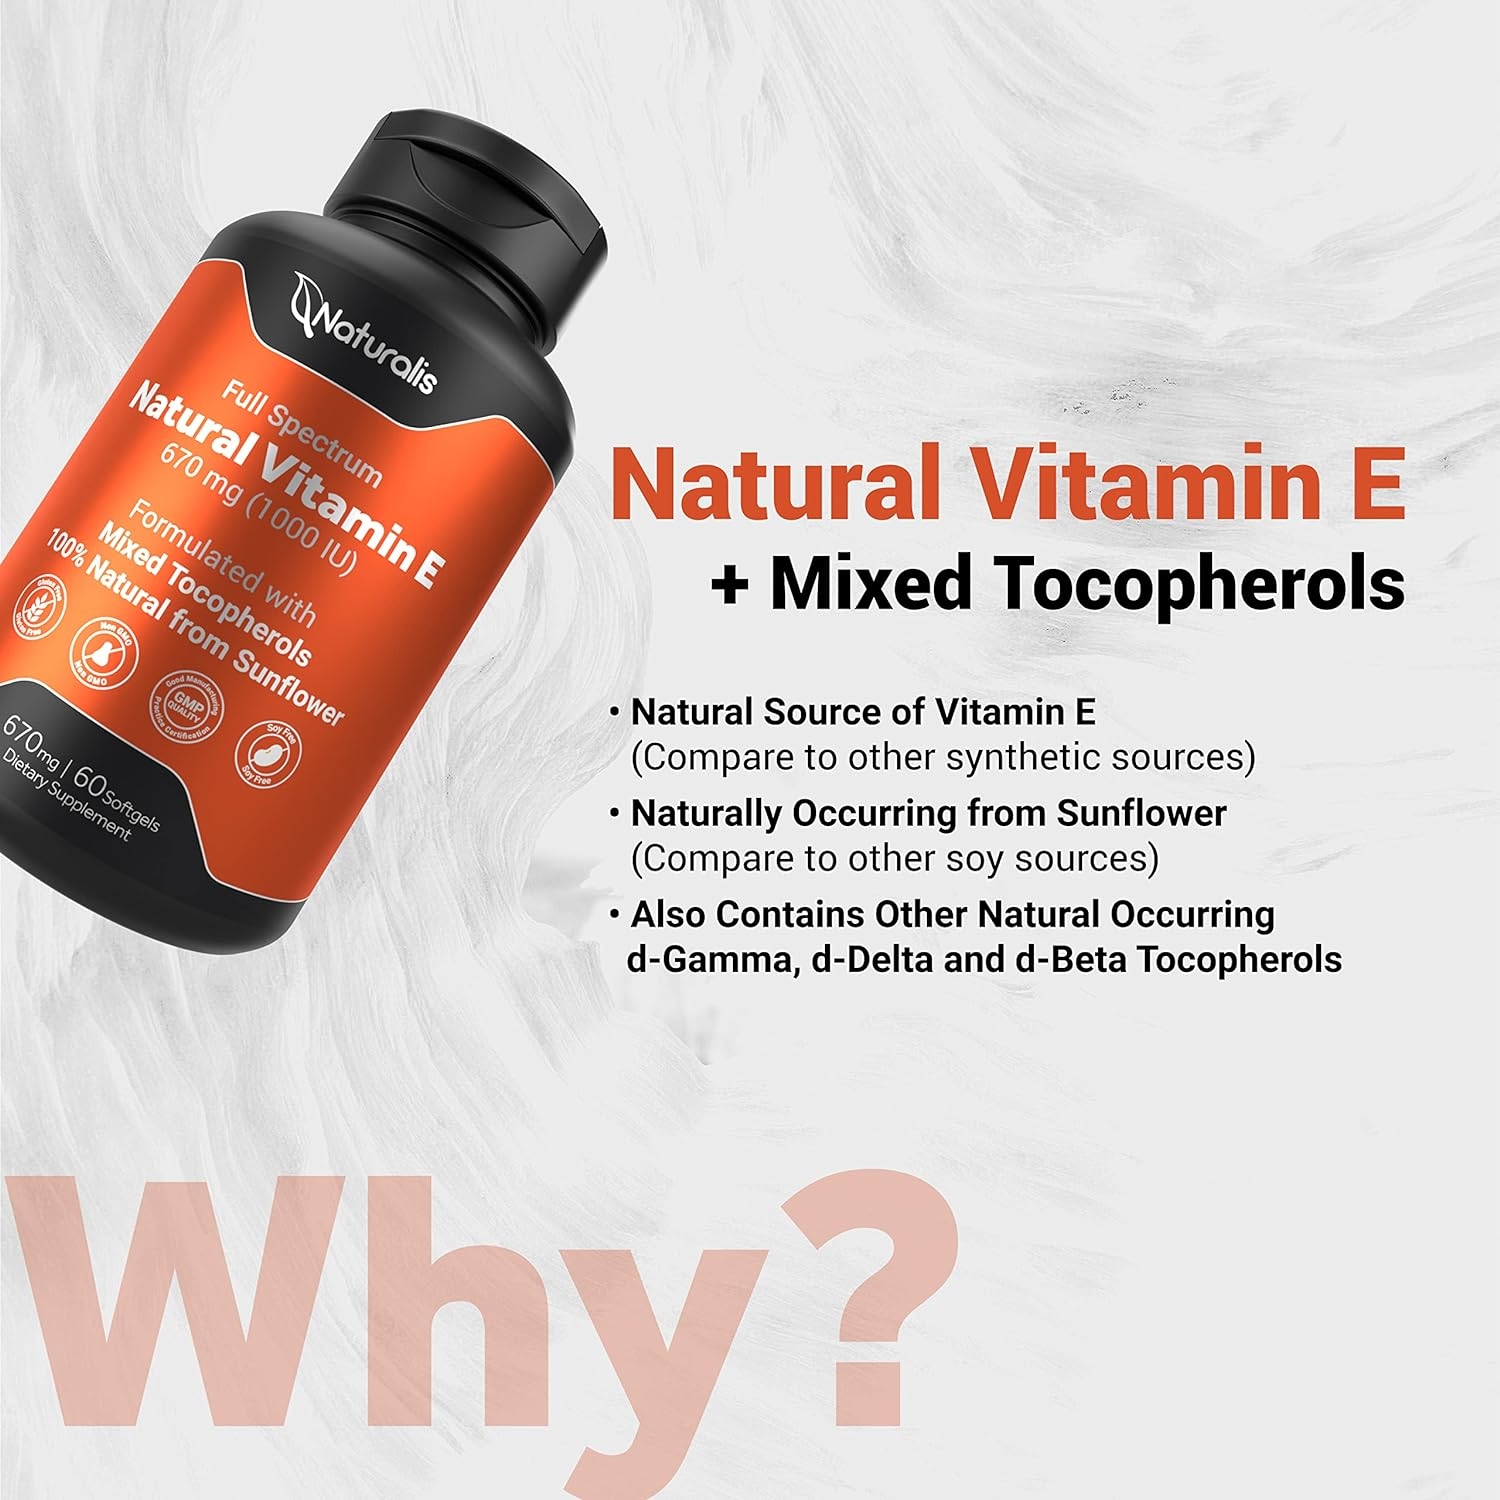 Naturalis Sunflower Vitamin E 670mg (1000 IU) with Mixed Tocopherols | Essential Skin Vitamin & Immune Support | Non-GMO, Soy & Gluten Free | 60 Softgels